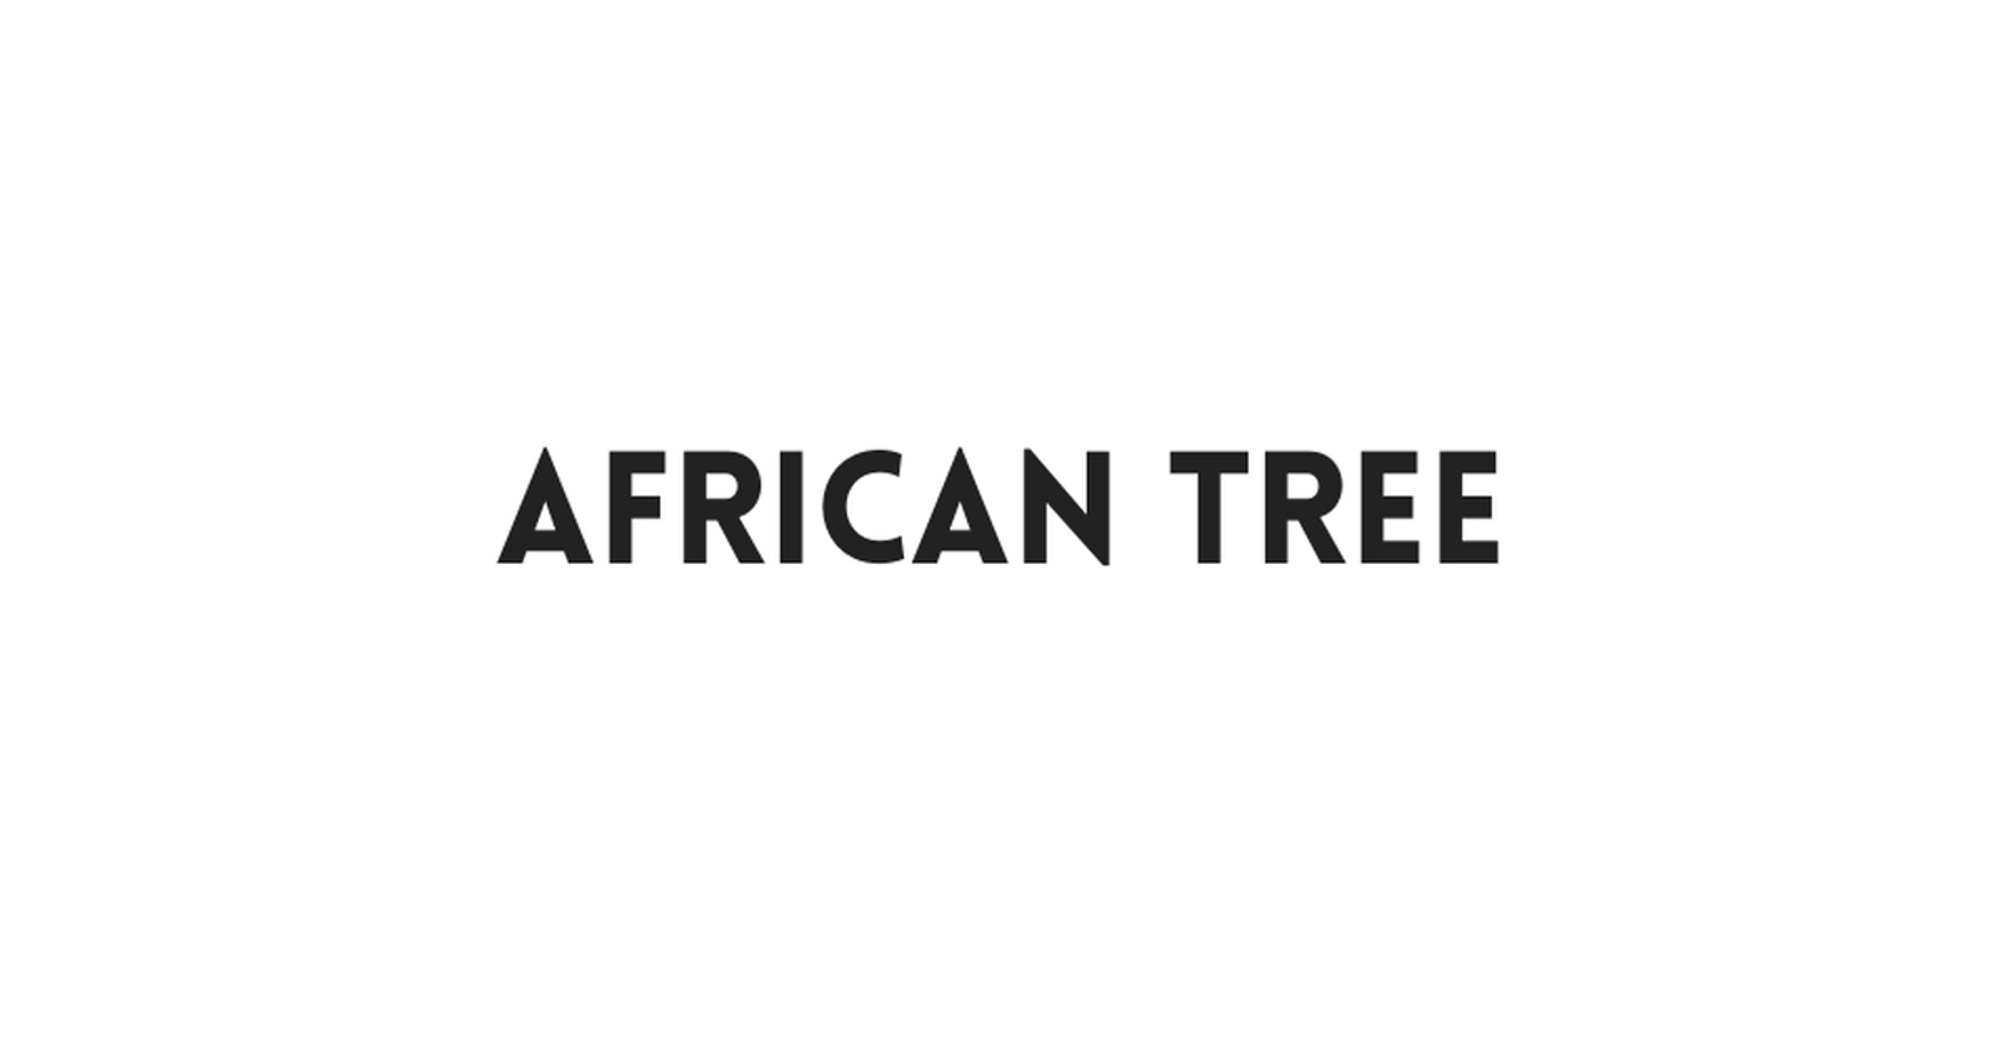 AFRICAN TREE